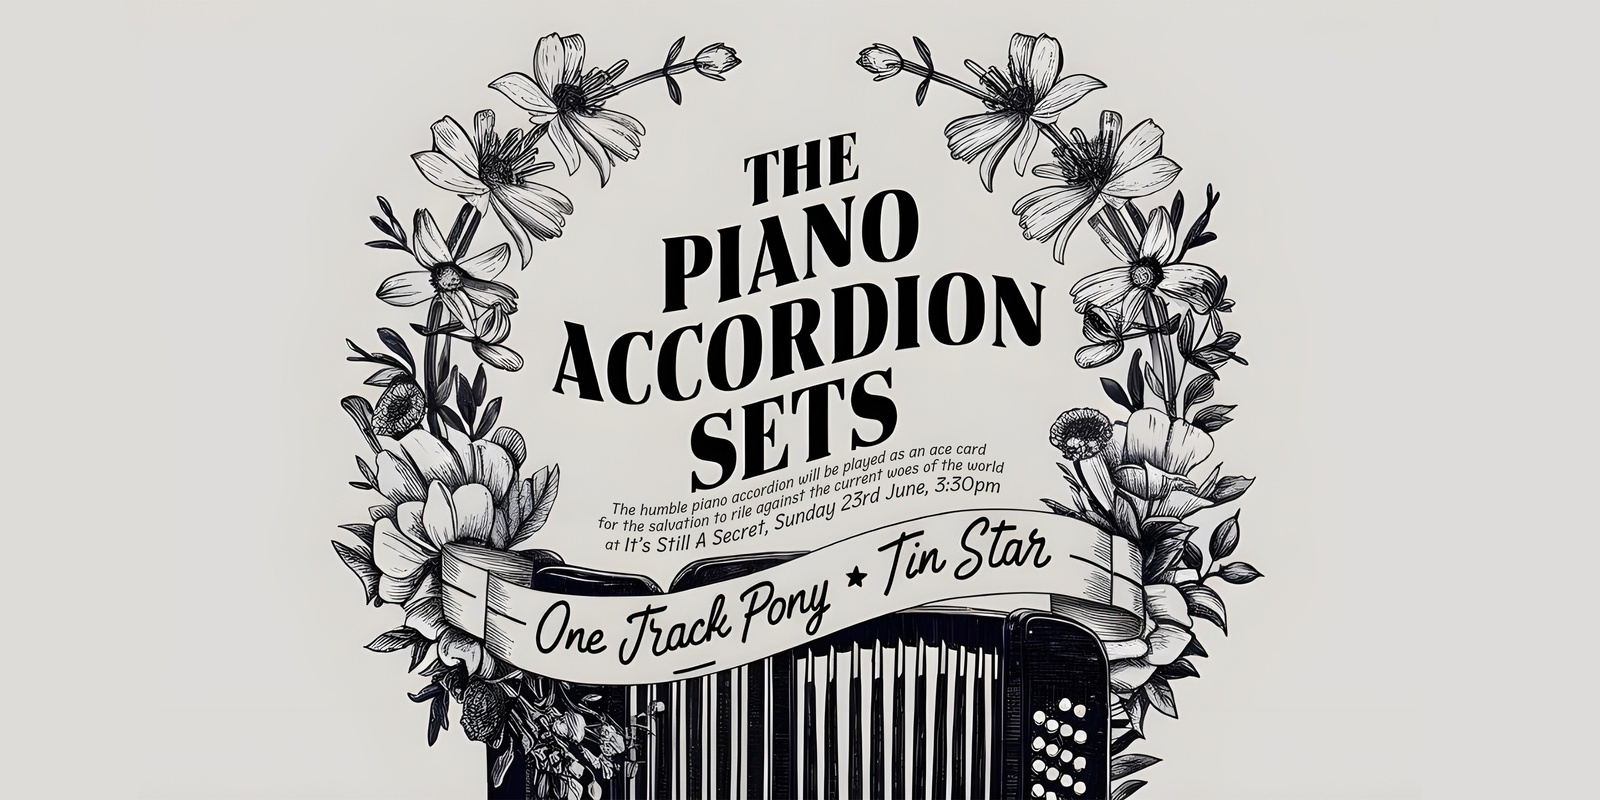 Banner image for One Track Pony and Tin Star - The Piano Accordion sets 